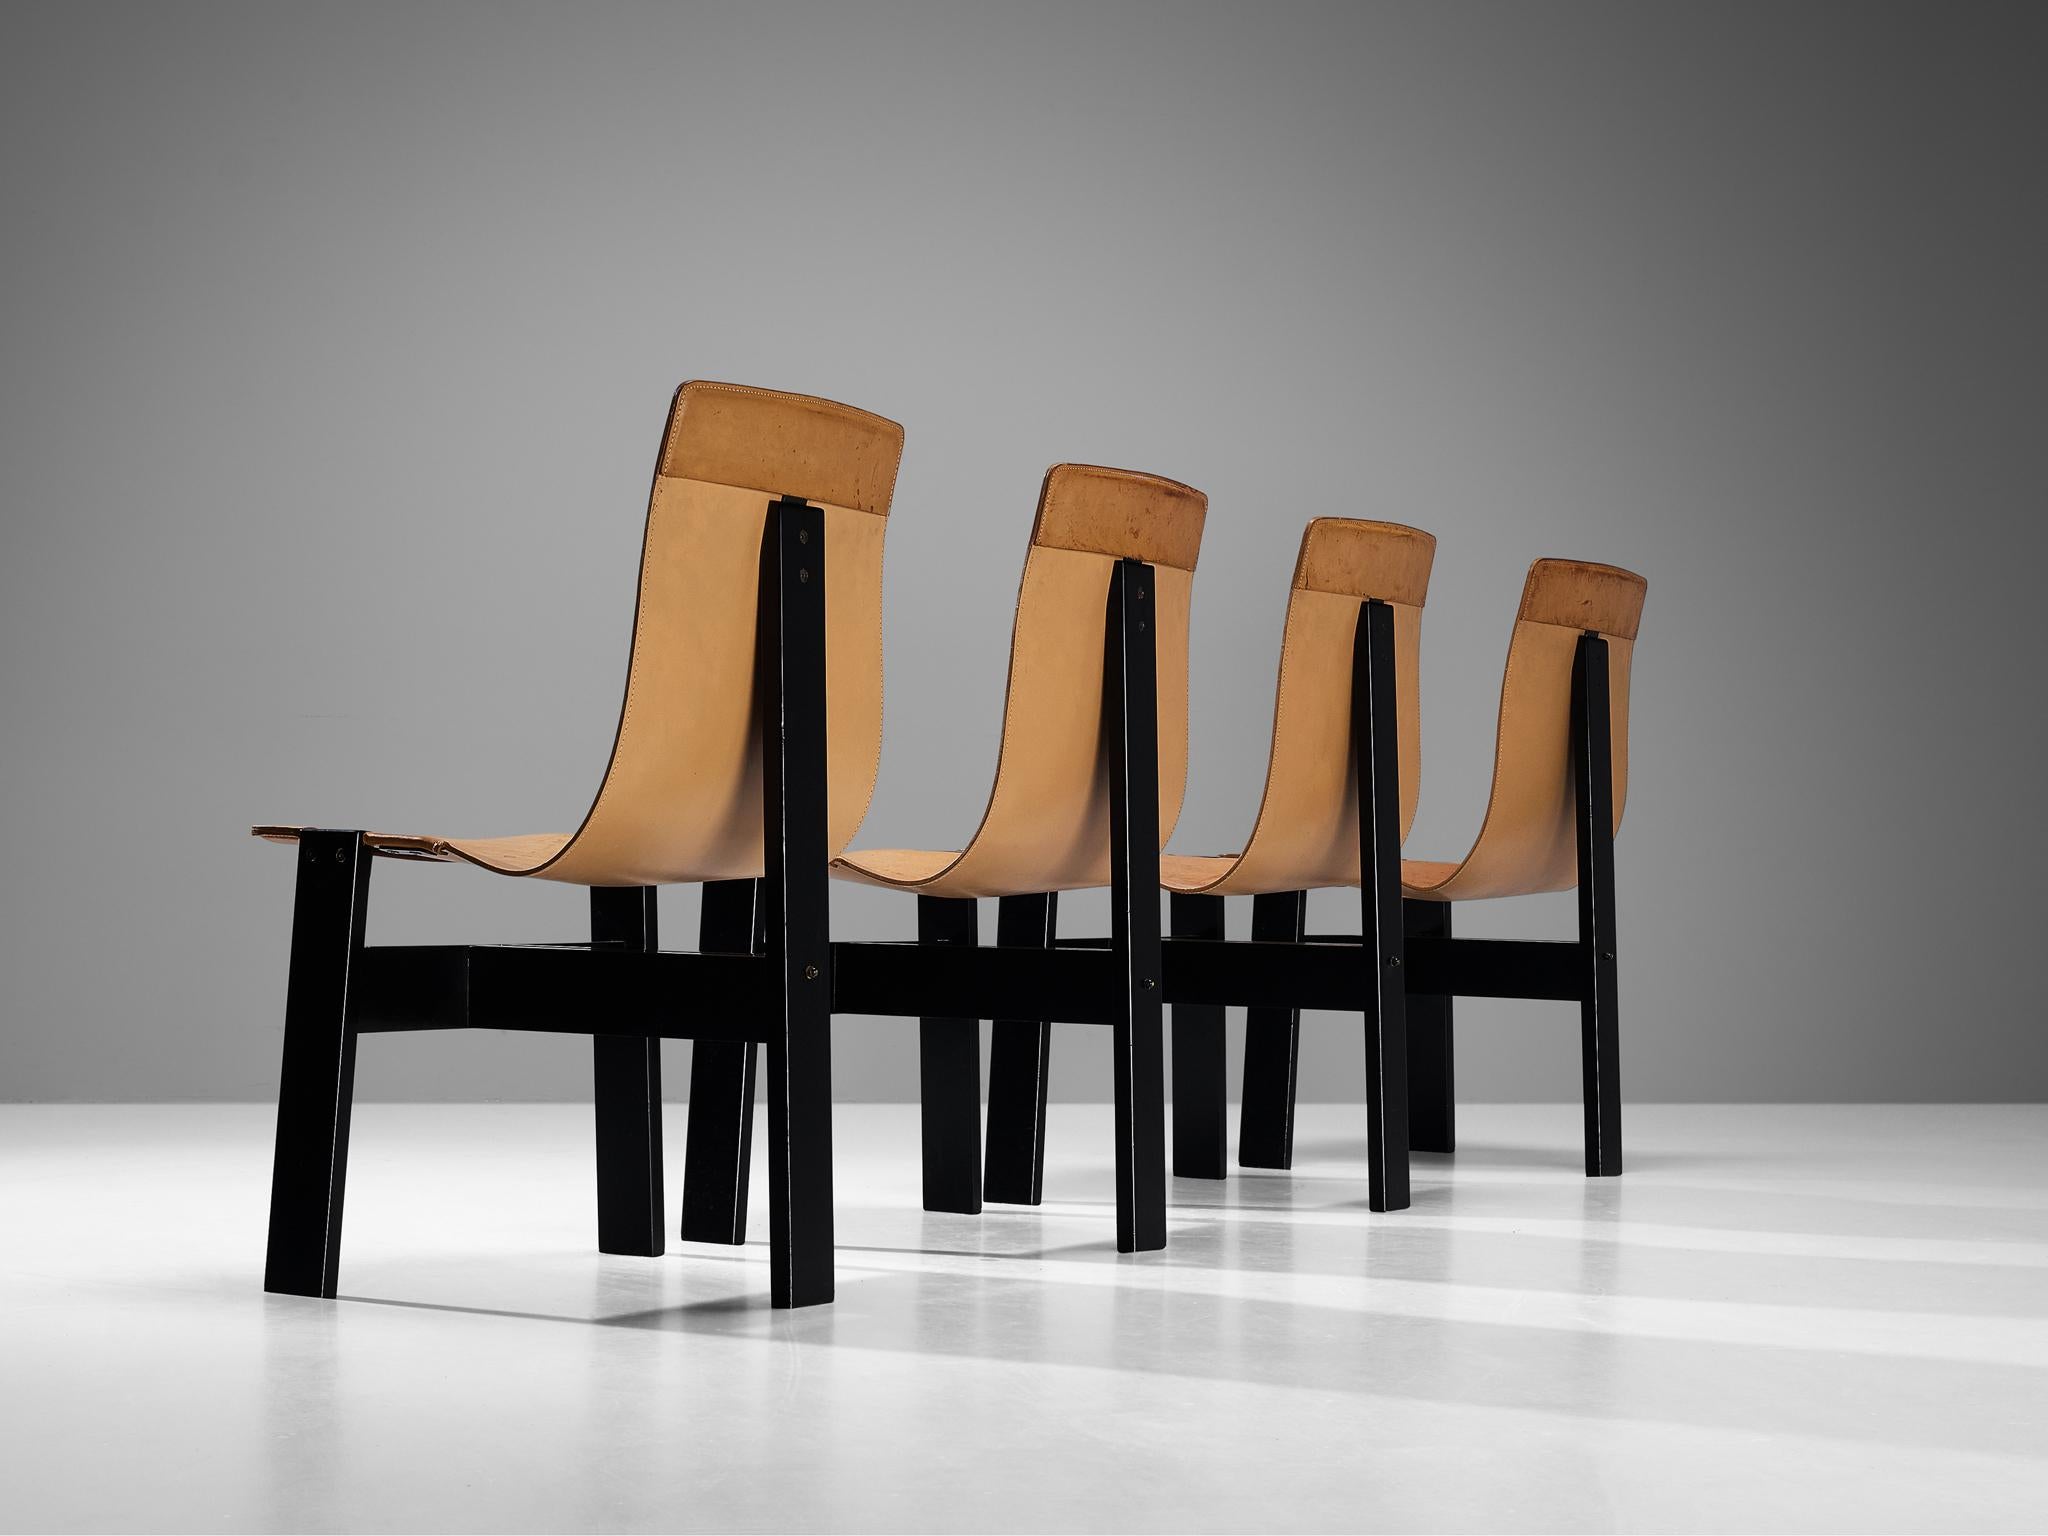 Angelo Mangiarotti for Skipper, set of four chairs model 'Tre 3', black lacquered wood, leather, Italy, design 1978

Set of four 'Tre 3' dining chairs by the Italian designer Angelo Mangiarotti. The basic frame of these wonderful chairs consist of